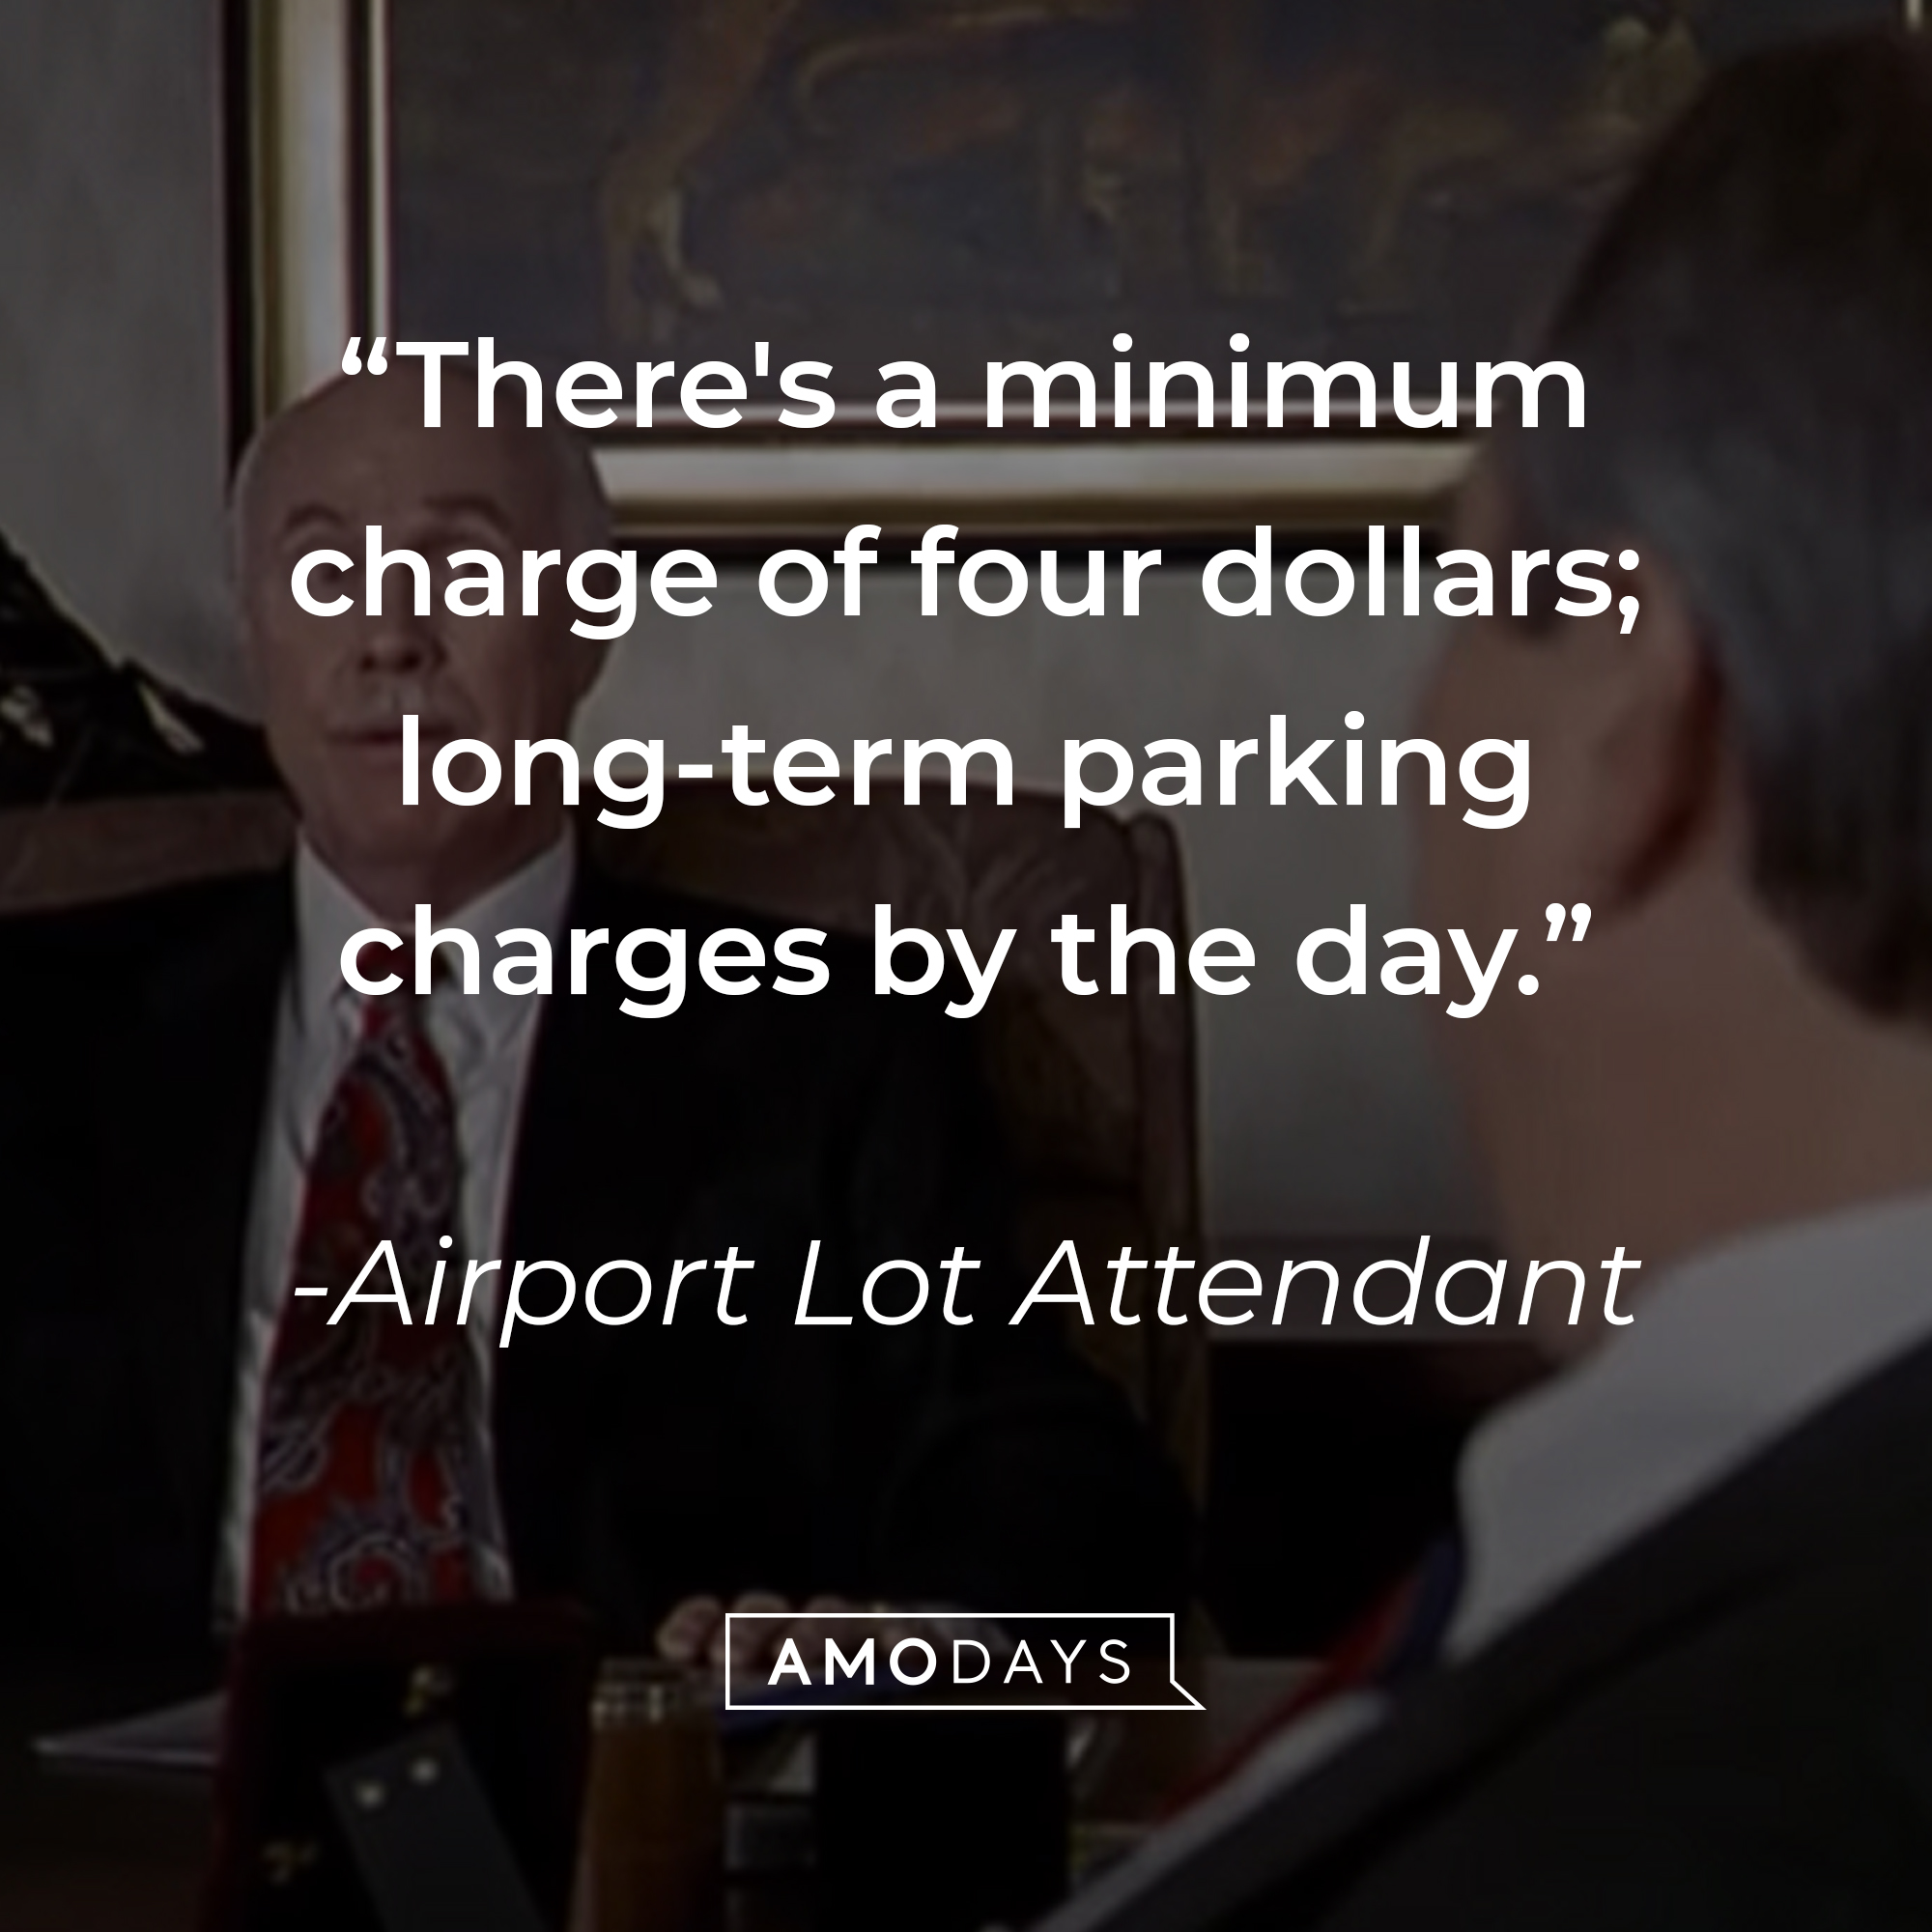 Airport Lot Attendant's quote: "There's a minimum charge of four dollars; long-term parking charges by the day." | Source: youtube.com/MGMStudios